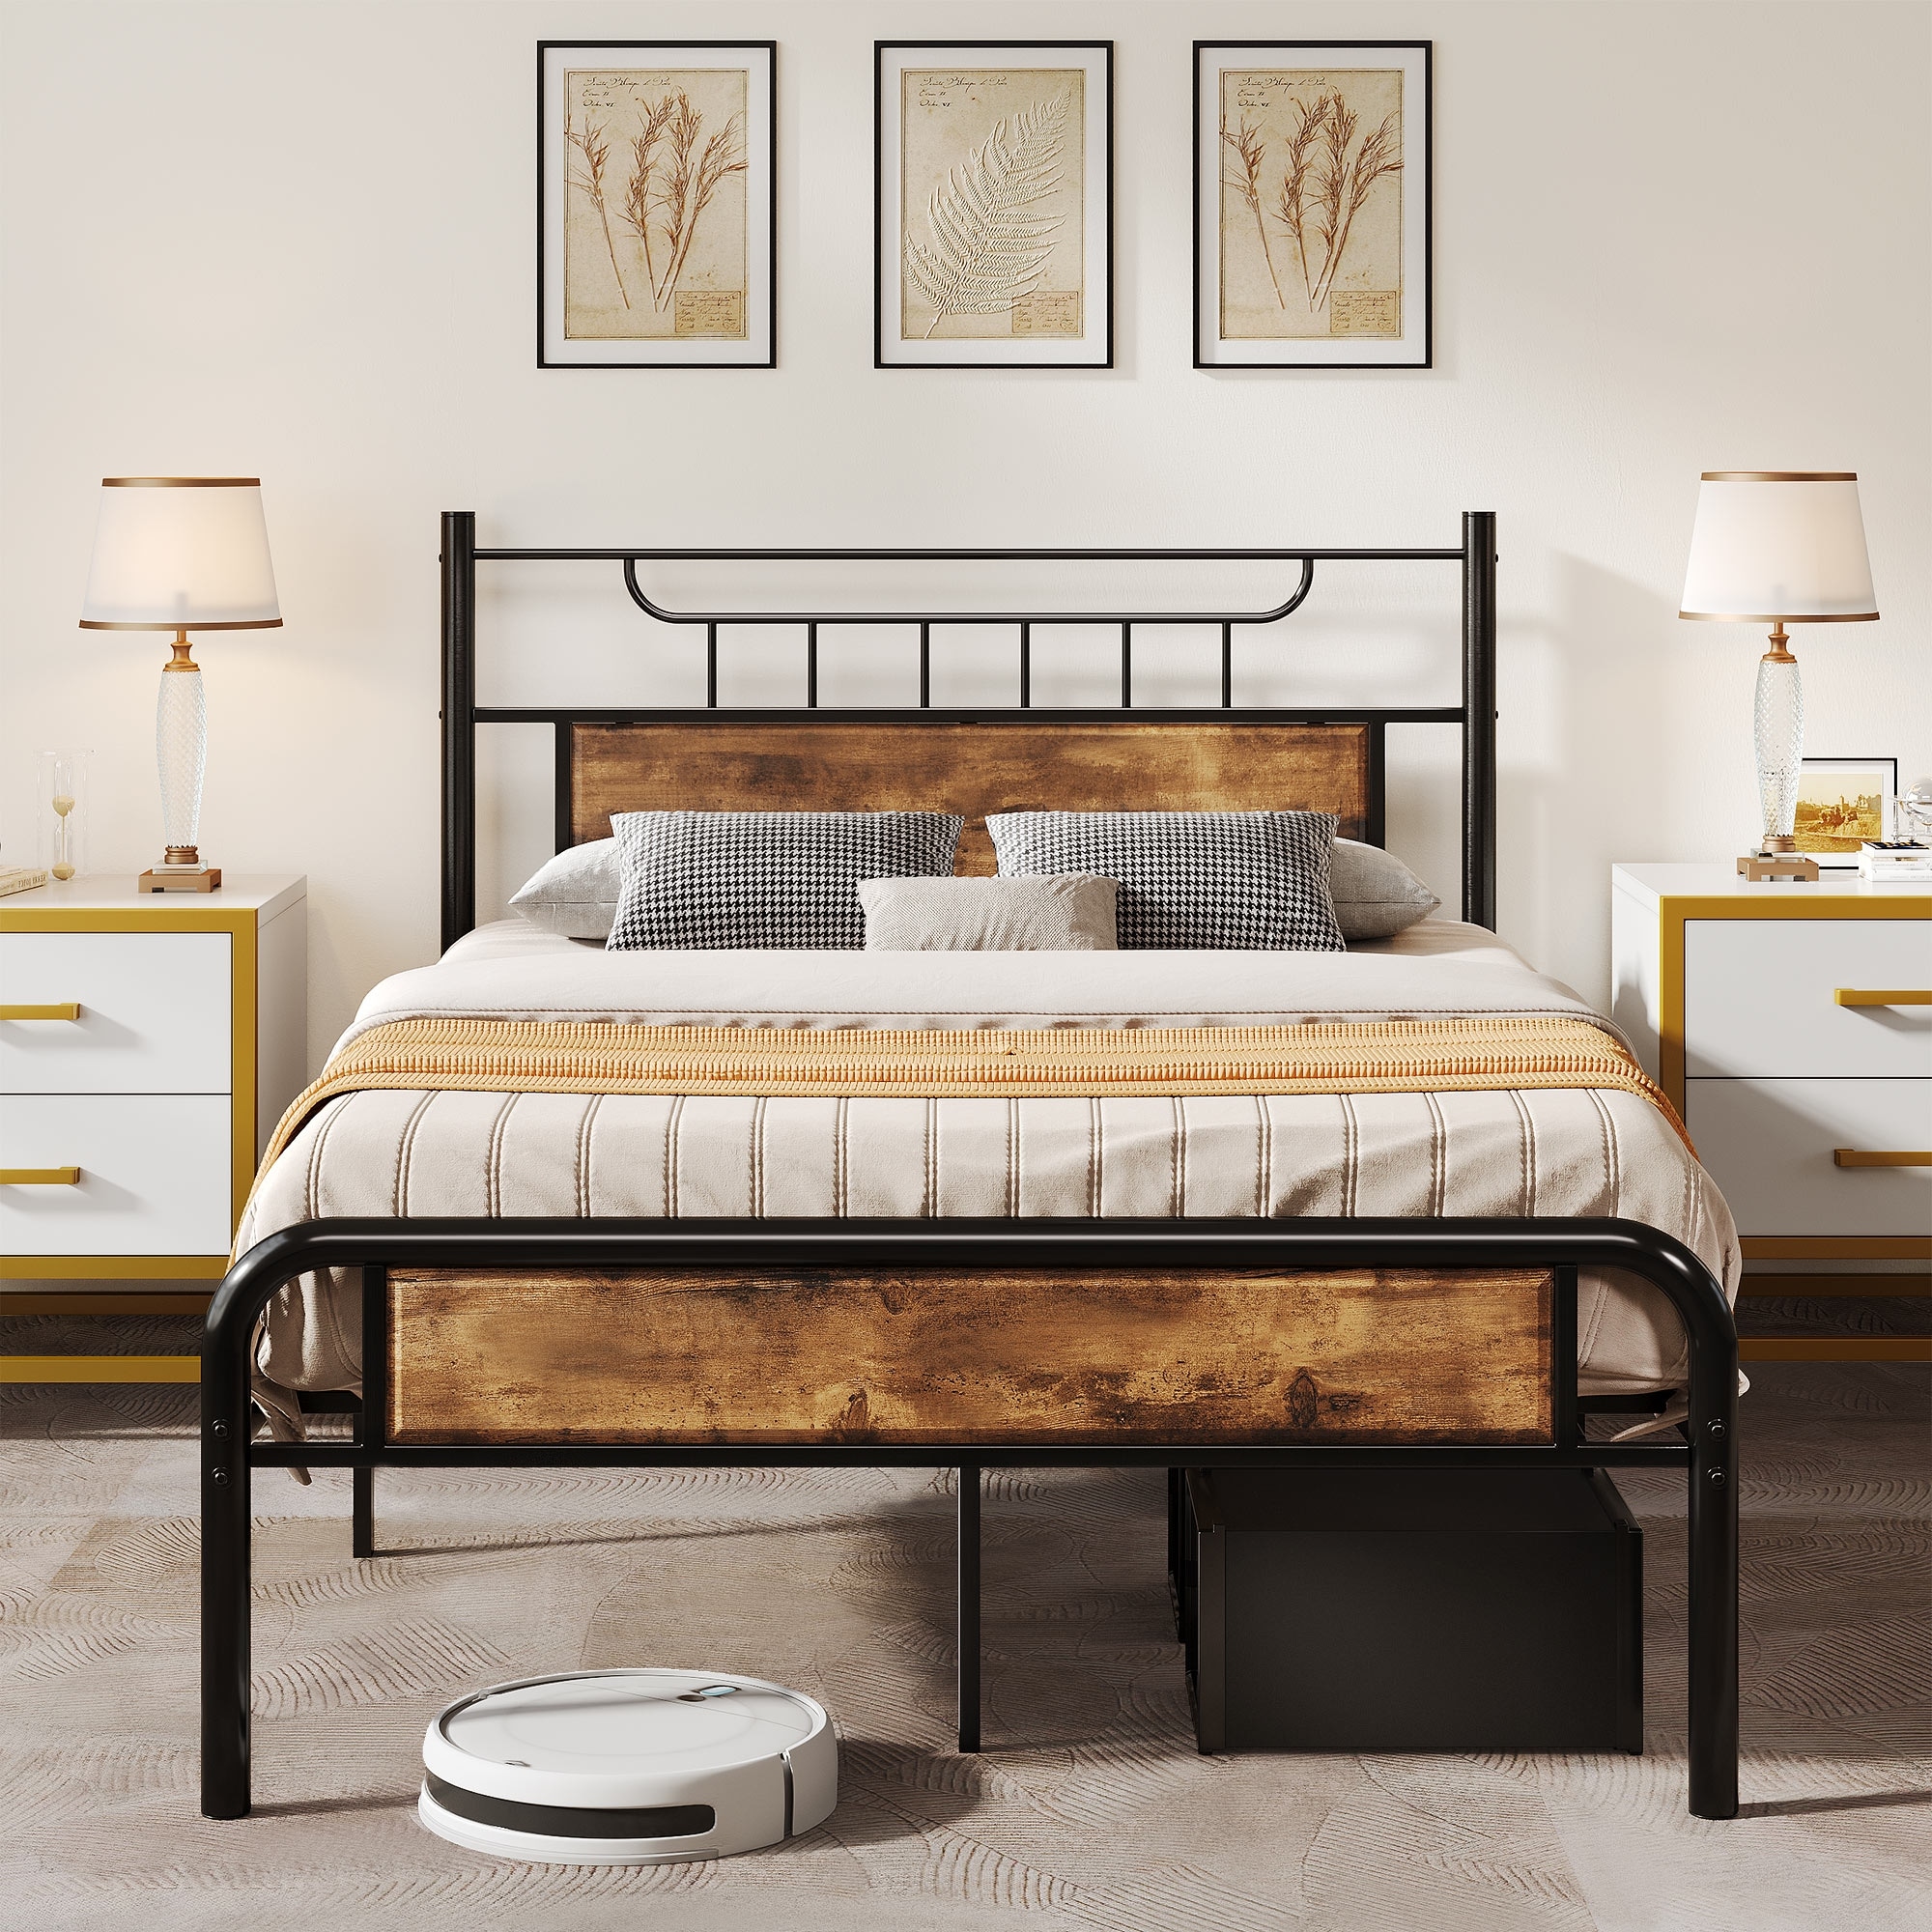 Moasis Wood And Metal Platform Bed Frame With Headboard Twin/full/queen Size